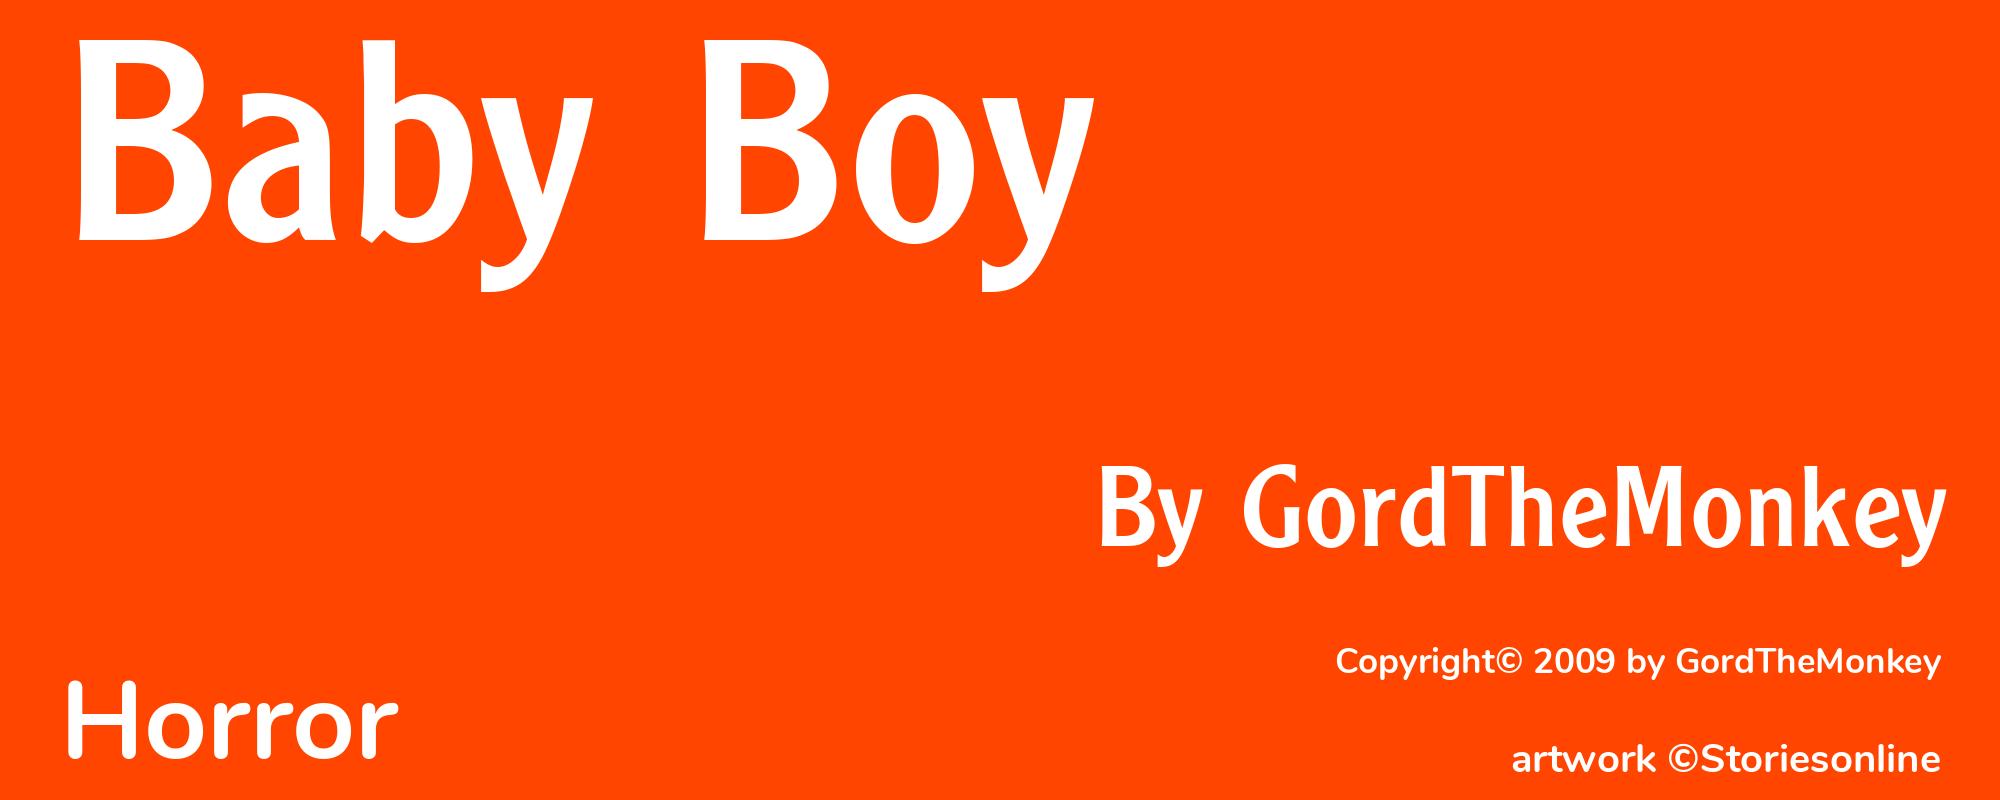 Baby Boy - Cover